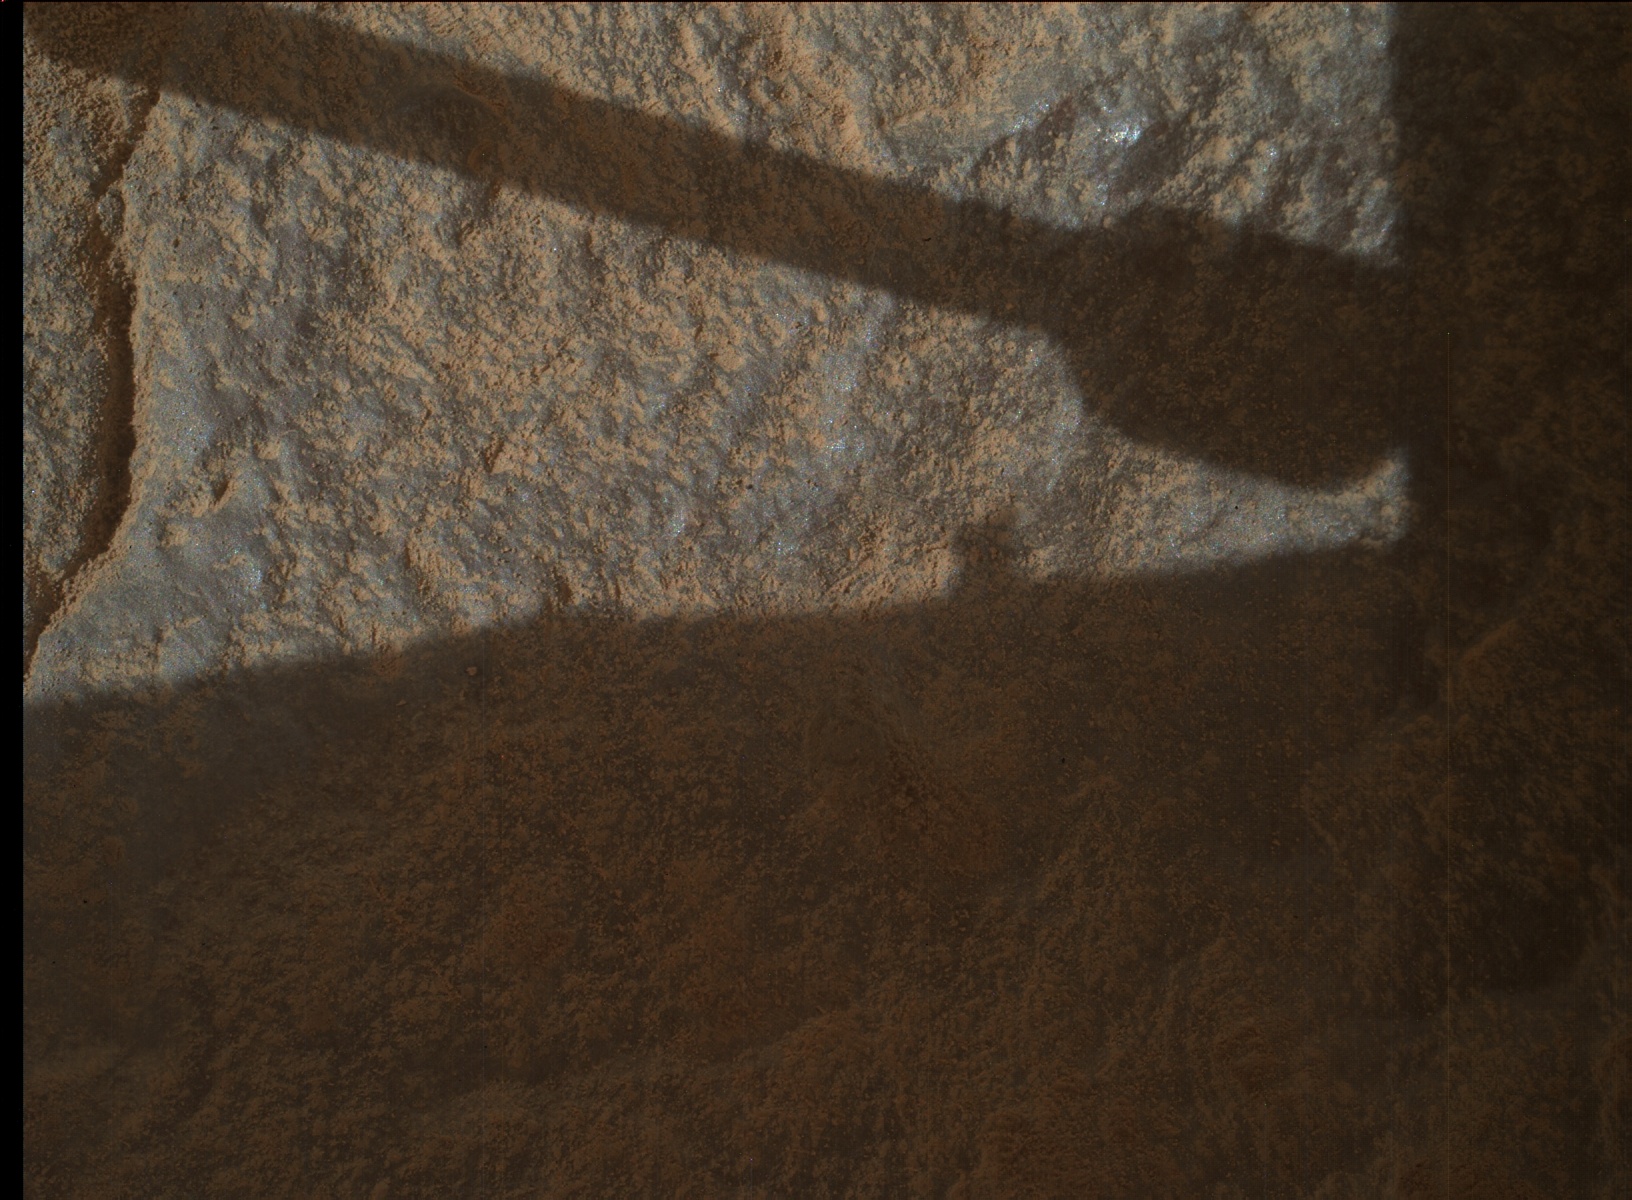 Nasa's Mars rover Curiosity acquired this image using its Mars Hand Lens Imager (MAHLI) on Sol 3674